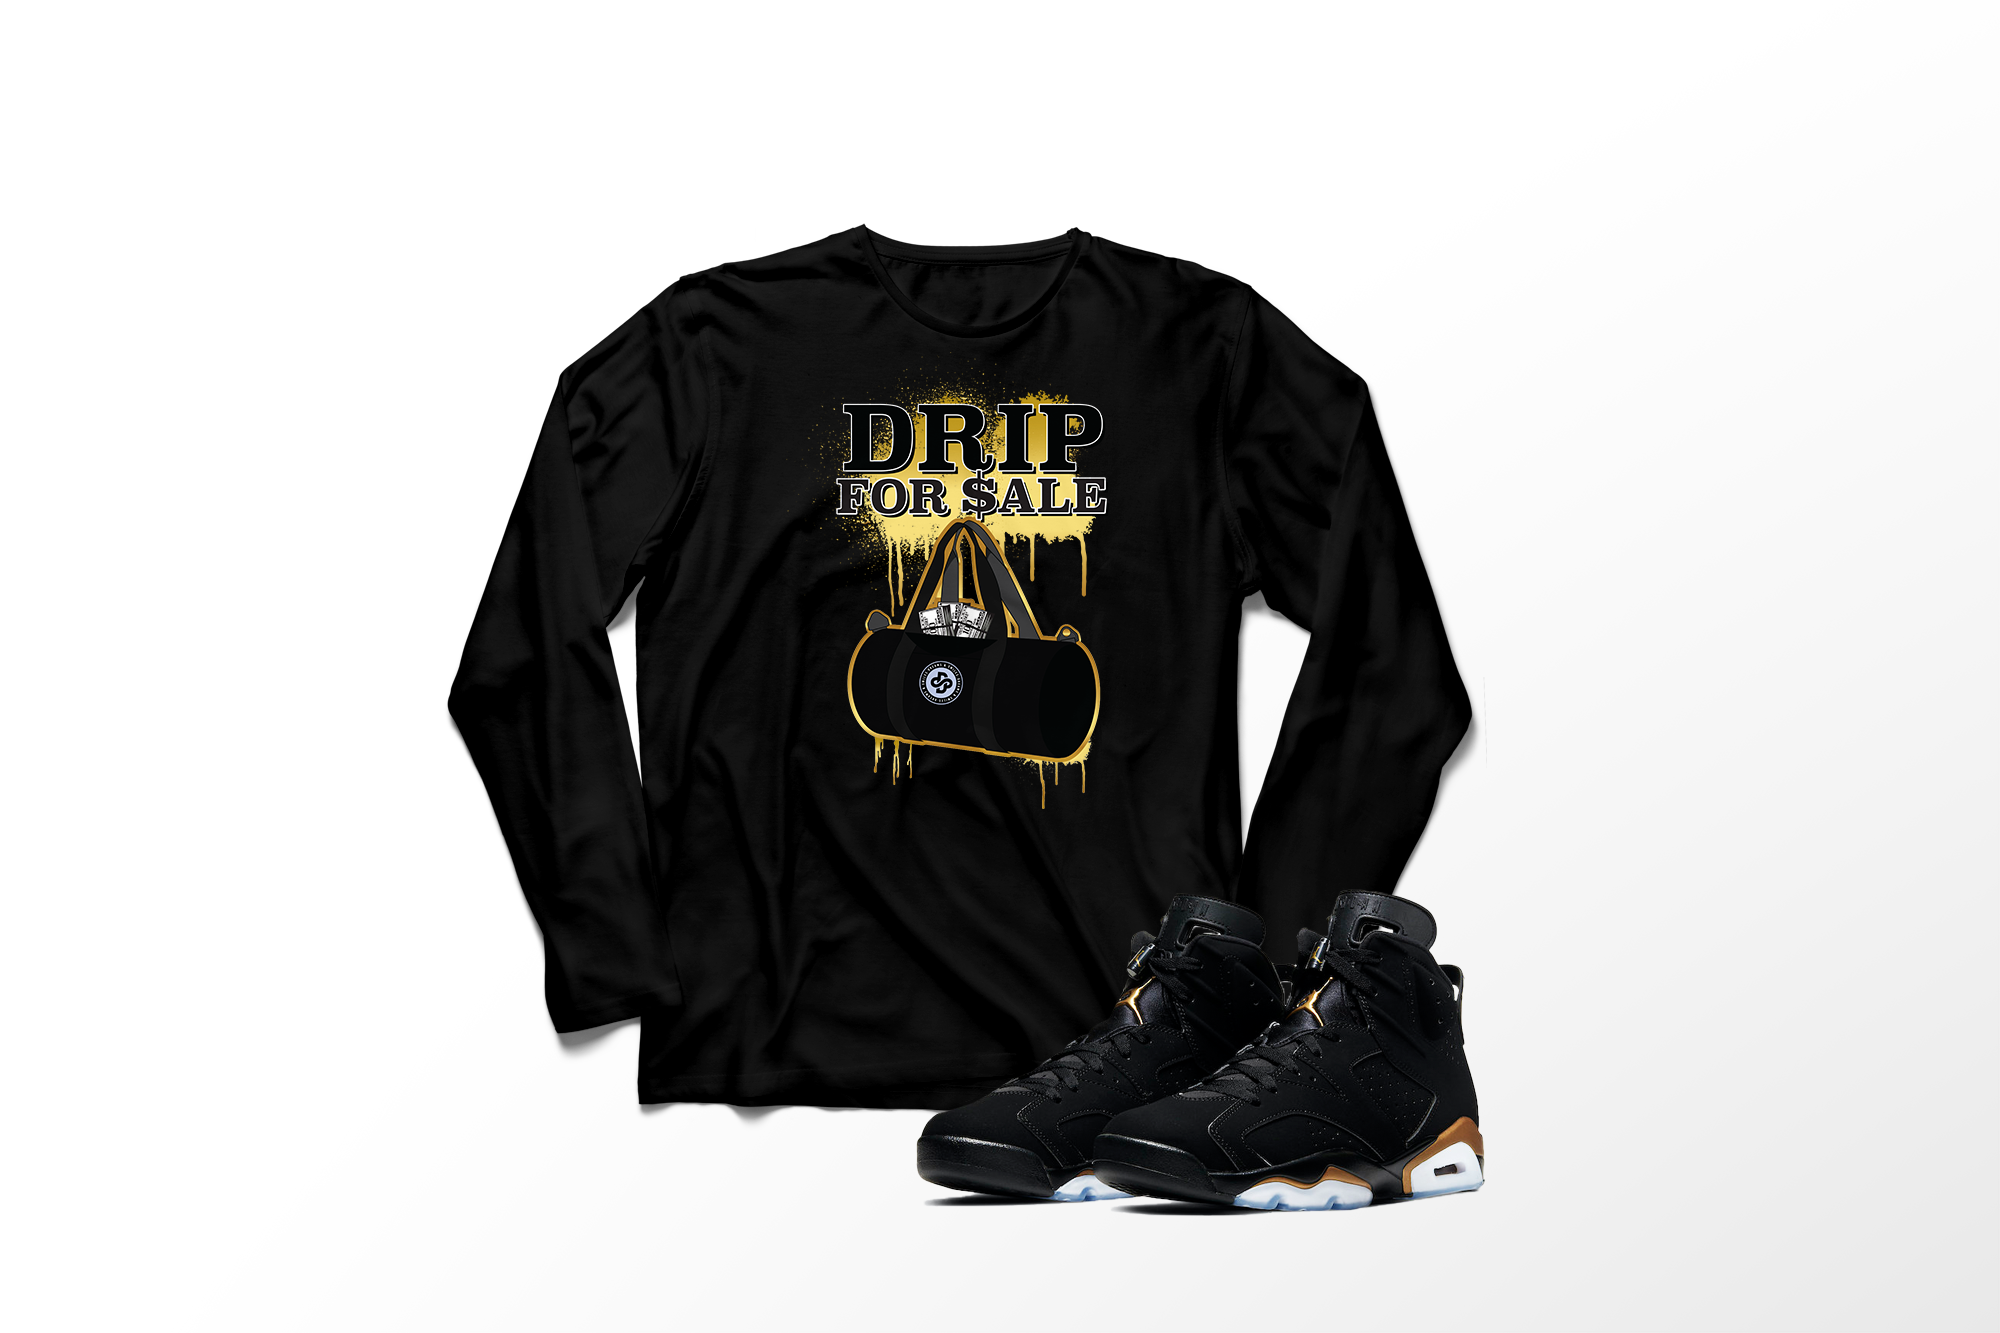 'Drip For Sale' in DMP CW Men's Comfort Long Sleeve